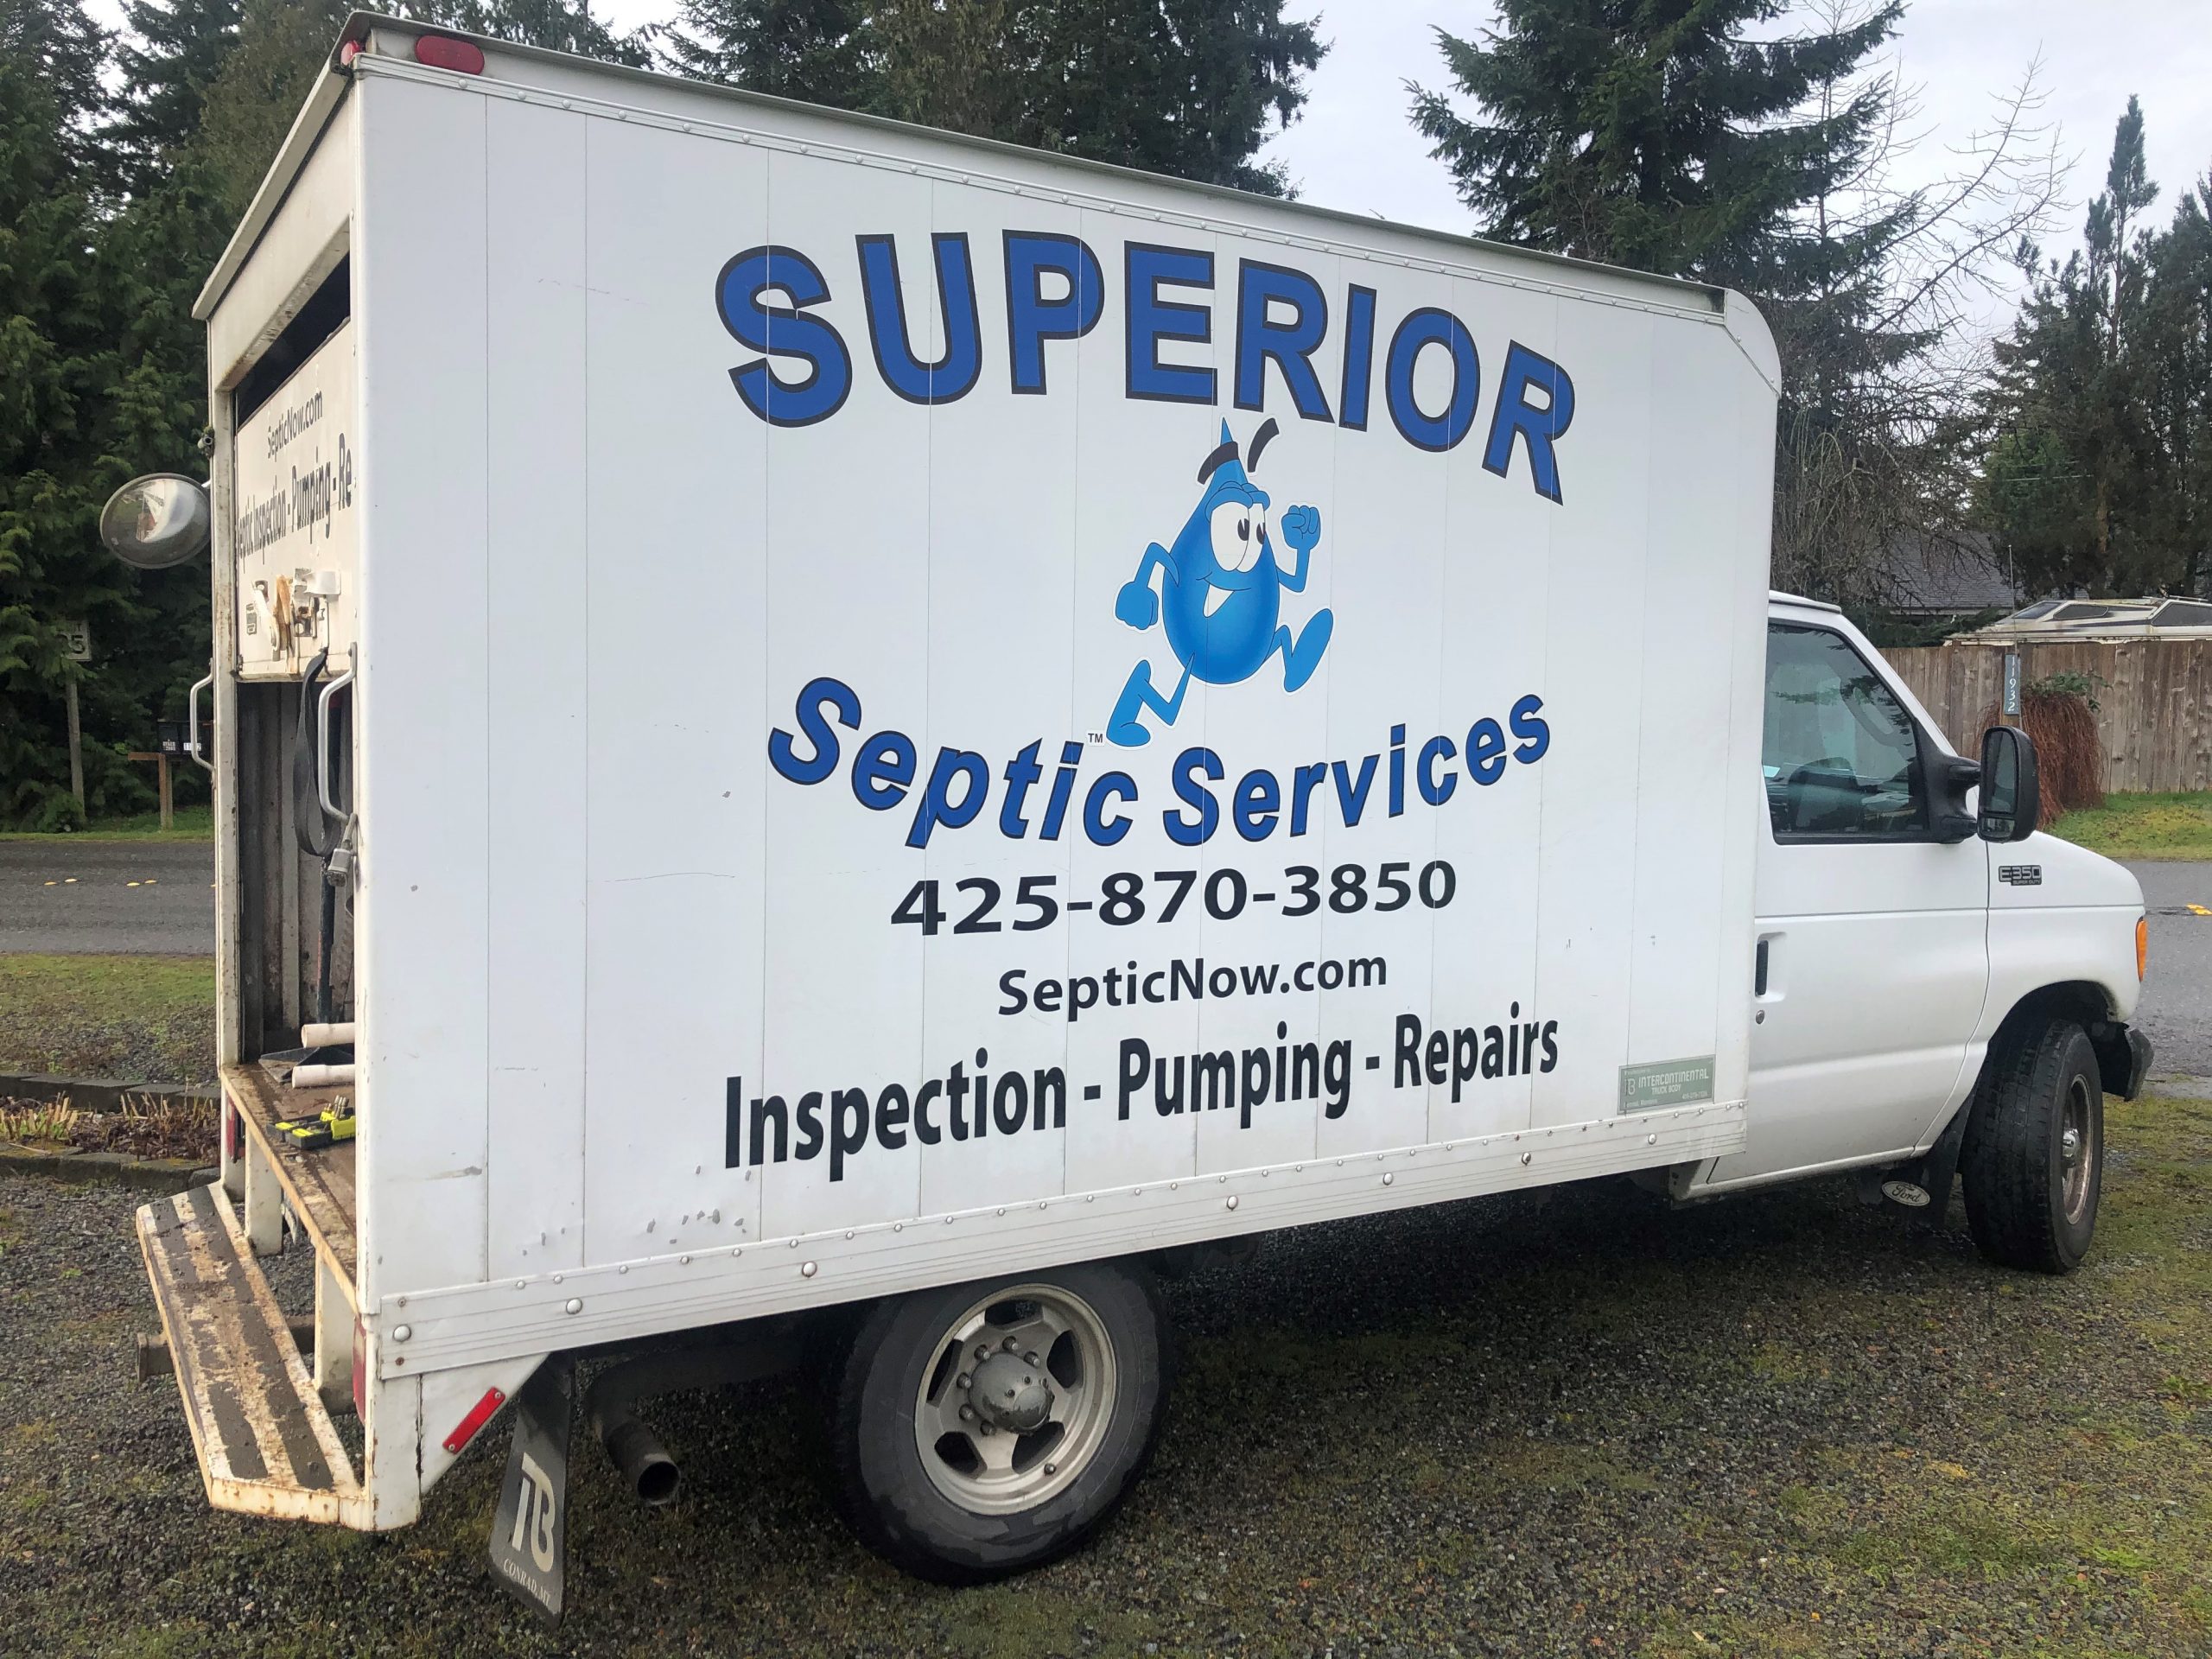 Only Hire Trusted Technicians For Septic Service In Mountlake Terrace